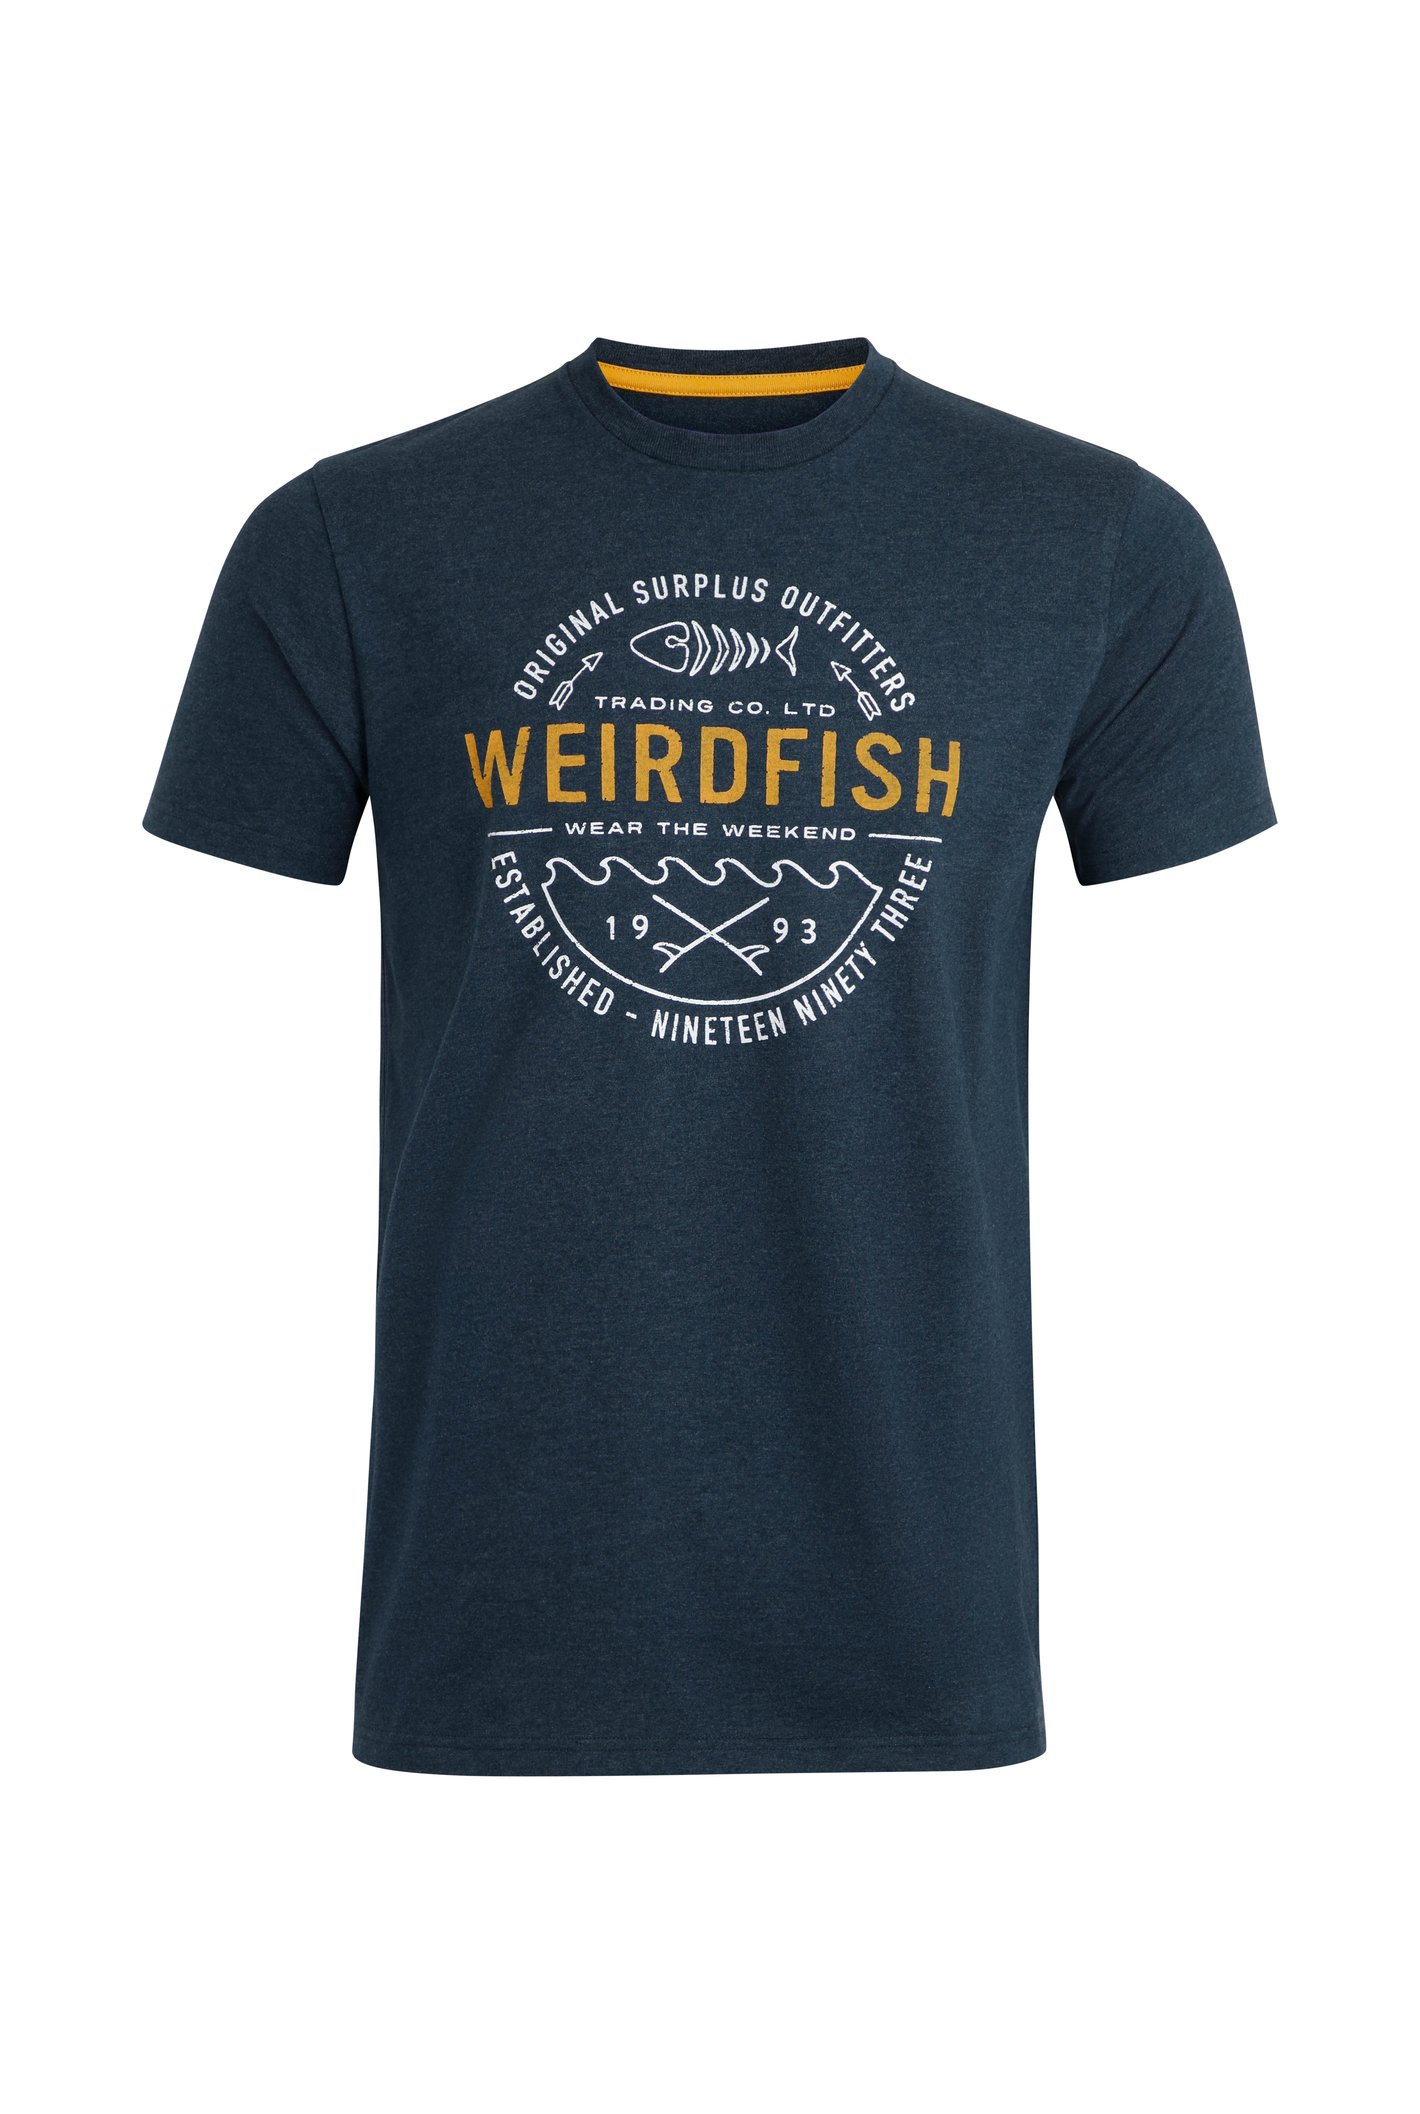 Weird Fish Waves Graphic T-Shirt Navy Size S